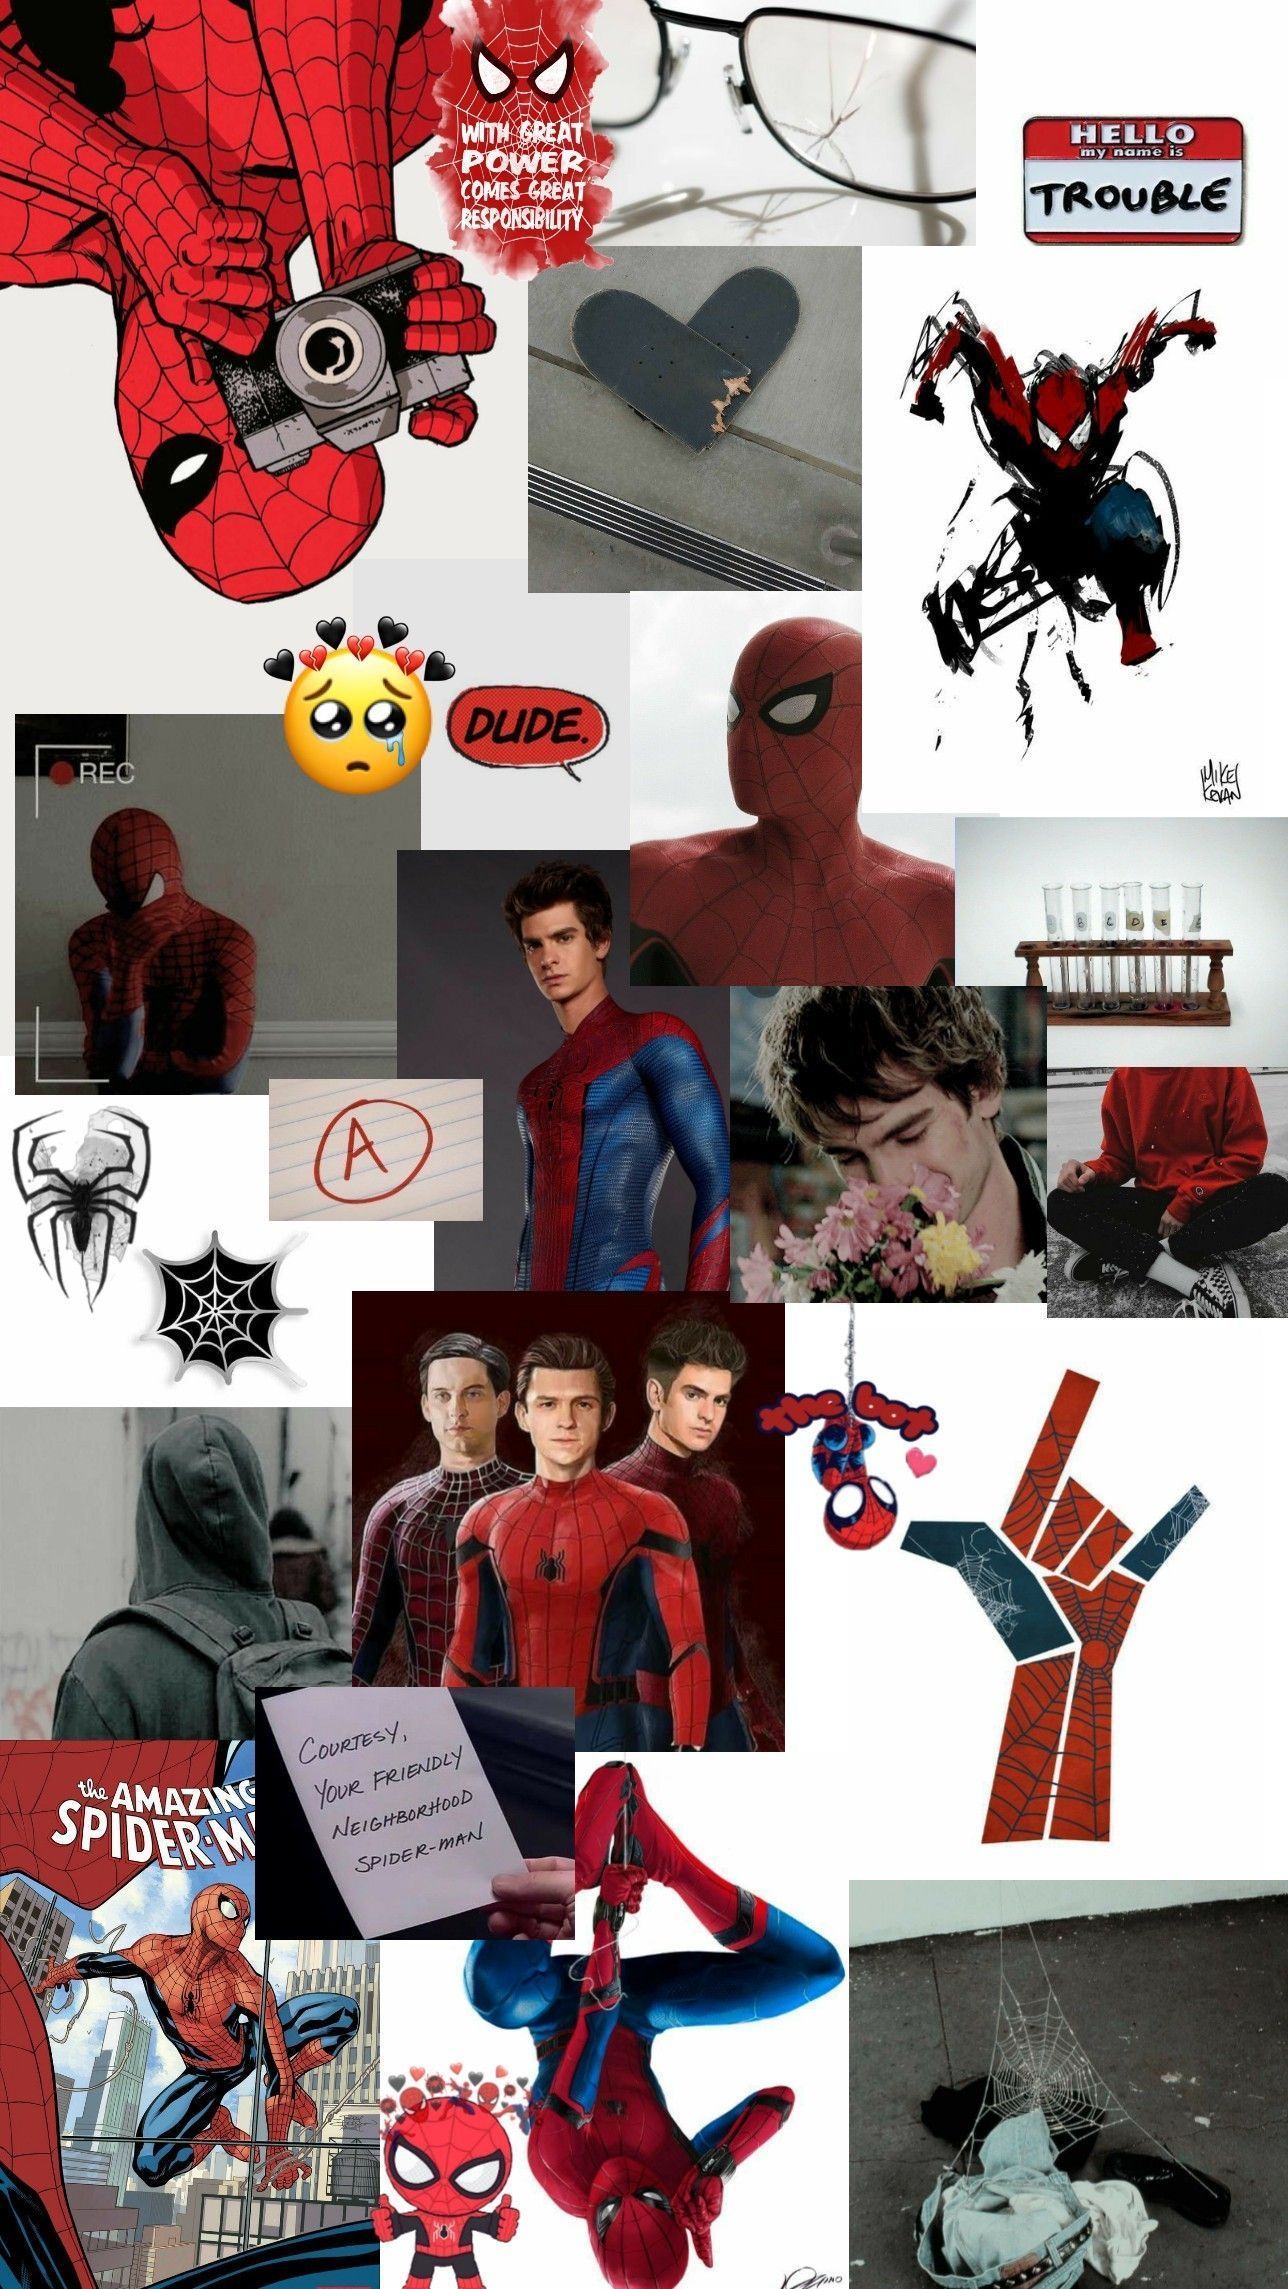 Spiderman collage with the new movie posters - Andrew Garfield, collage